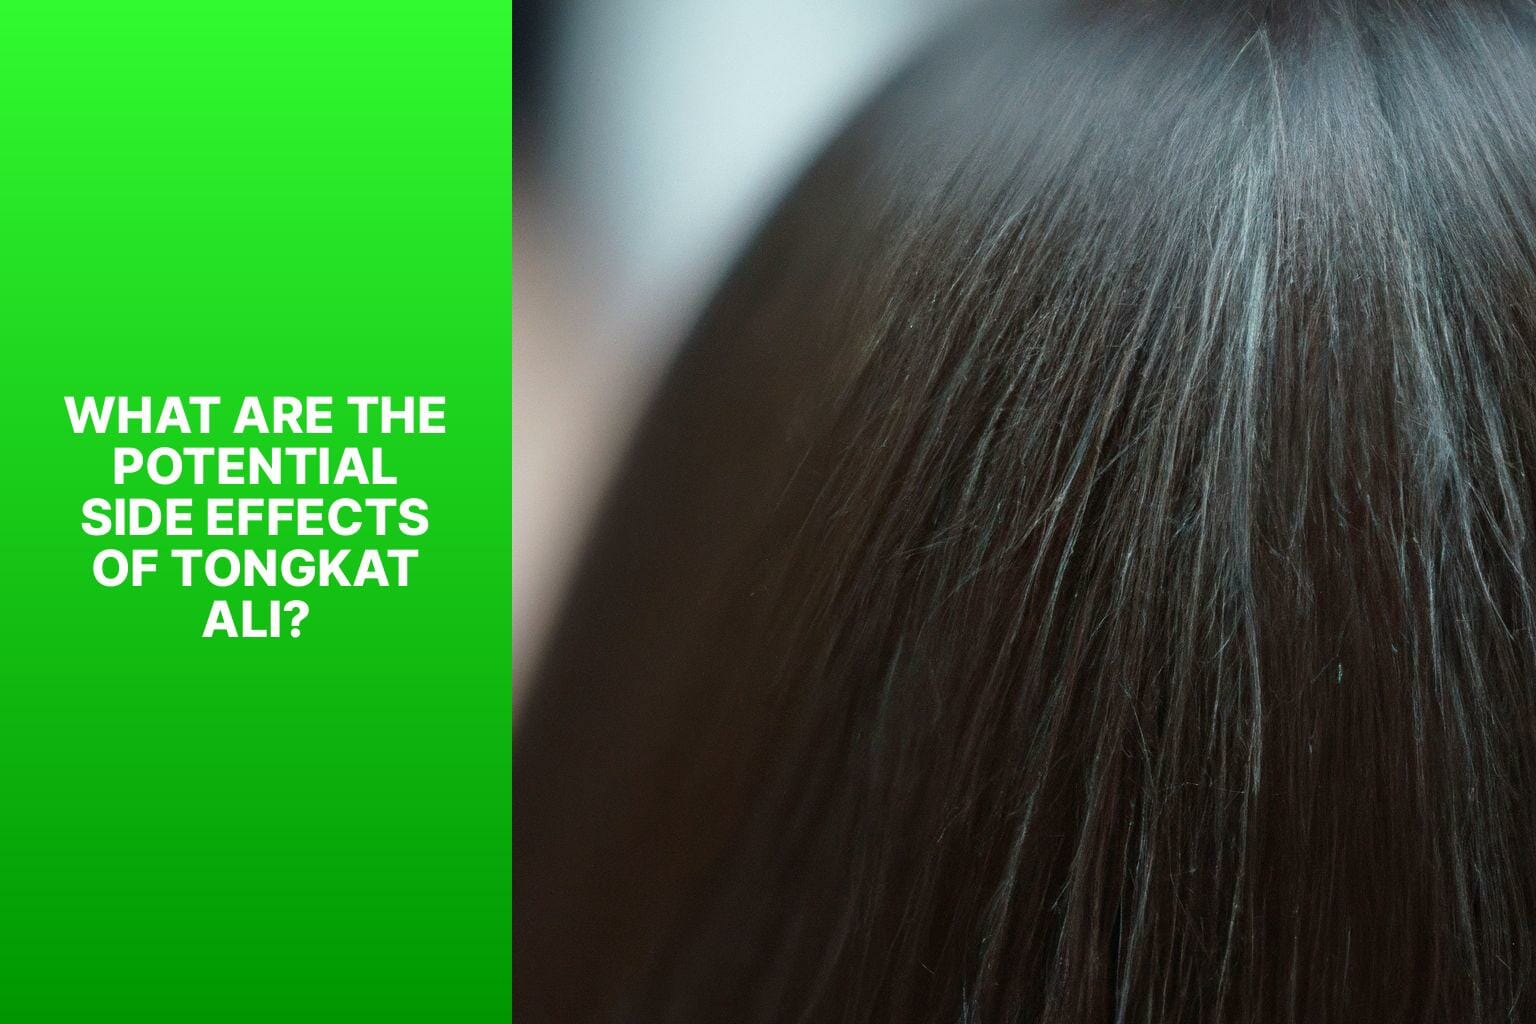 What Are the Potential Side Effects of Tongkat Ali? - Does Tongkat Ali Cause Hair Loss? 